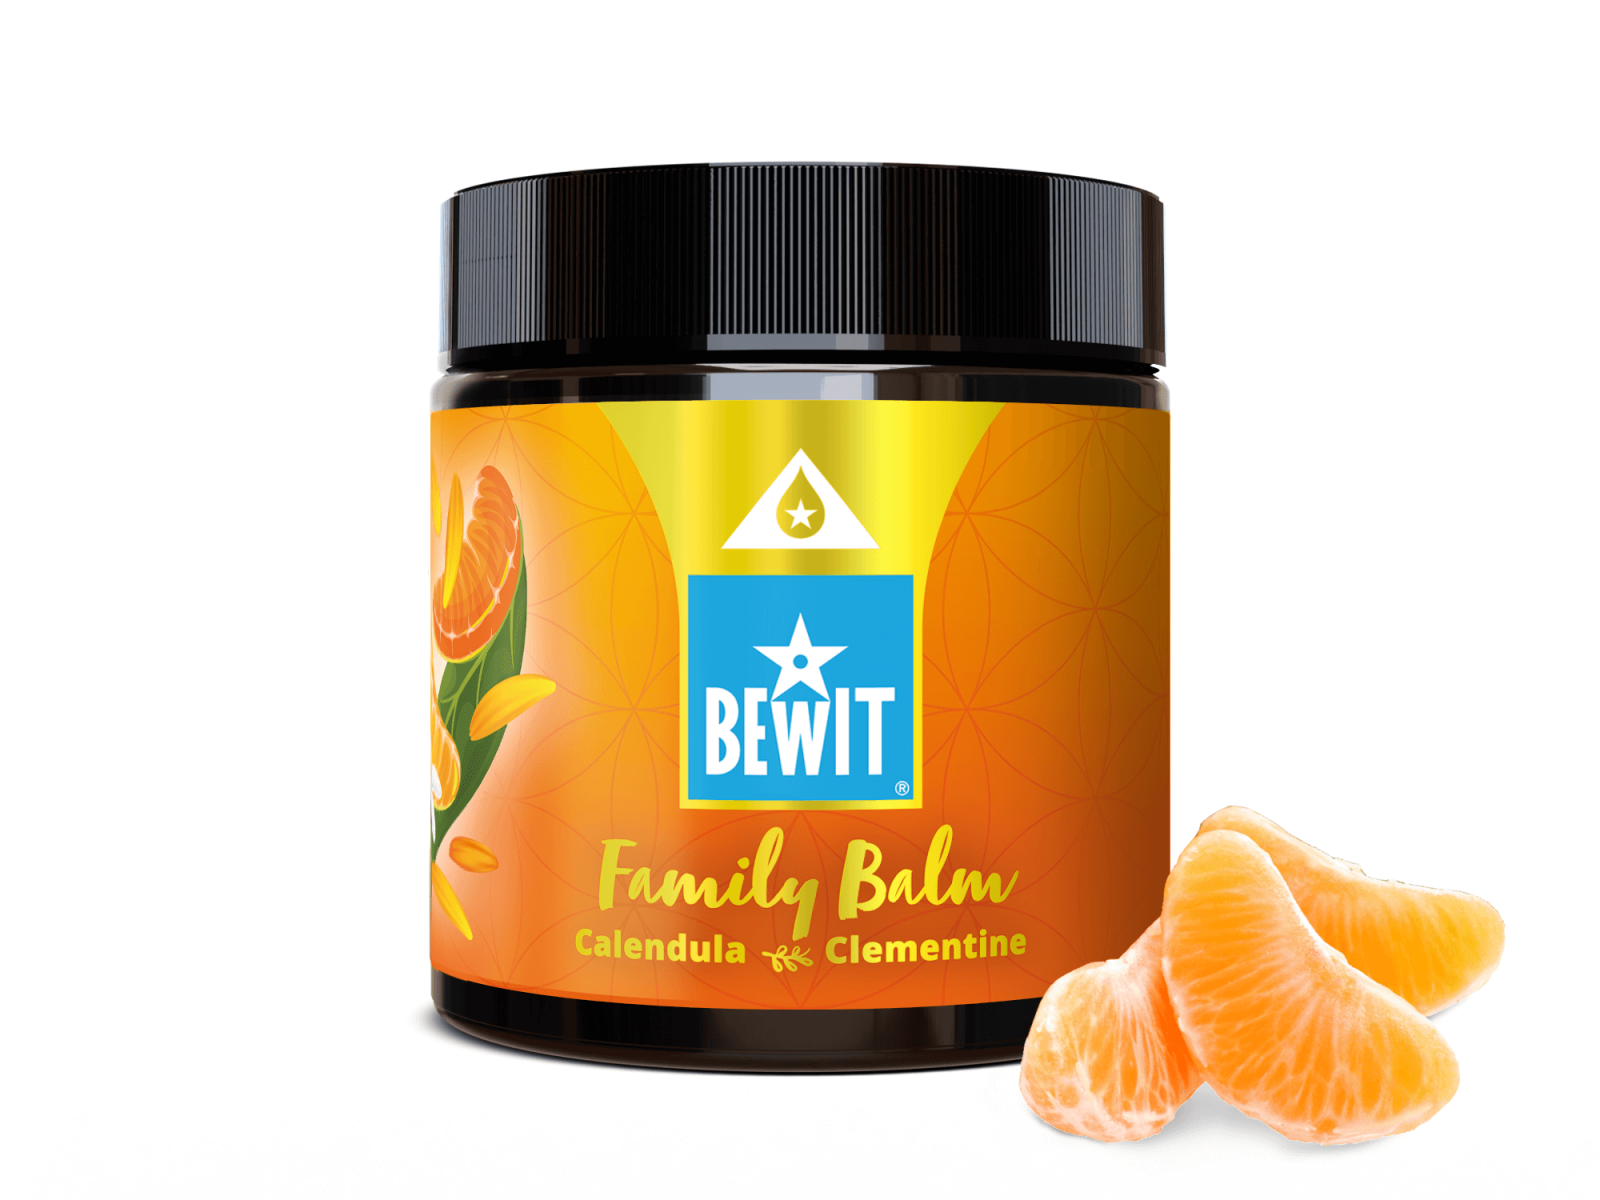 BEWIT FAMILY BALM CALENDULA AND CLEMENTINE - CARING BALM FOR THE WHOLE FAMILY - 1